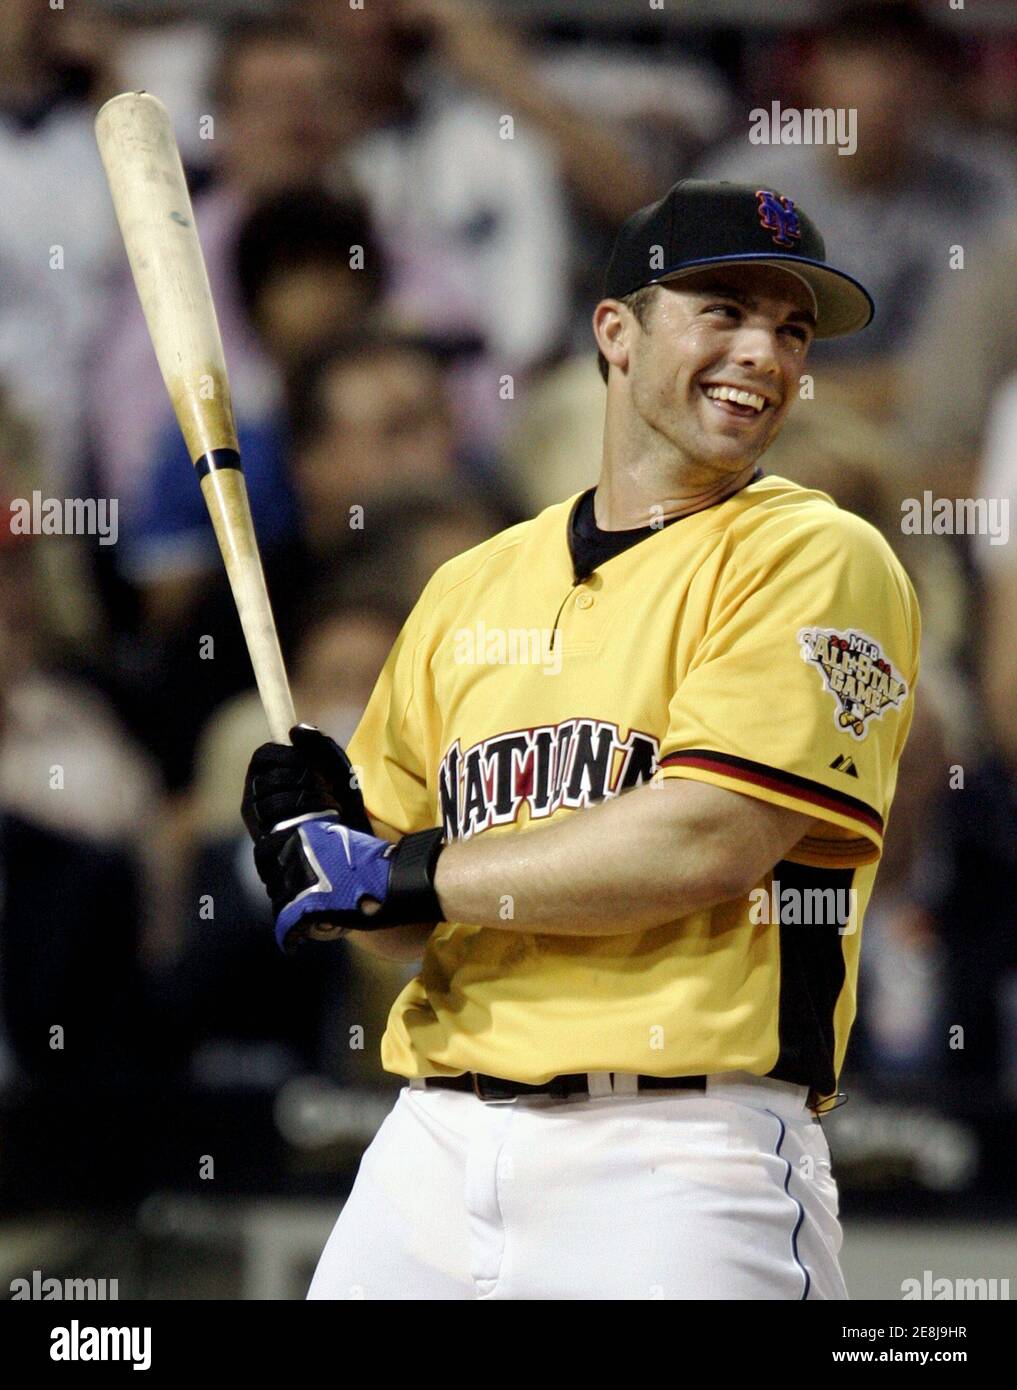 David Wright of the New York Mets smiles during the first round of the 2006 Major League Baseball All-Star Home Run Derby in Pittsburgh, Pennsylvania, July 10, 2006.       REUTERS/Gary Cameron  (UNITED STATES) Stock Photo